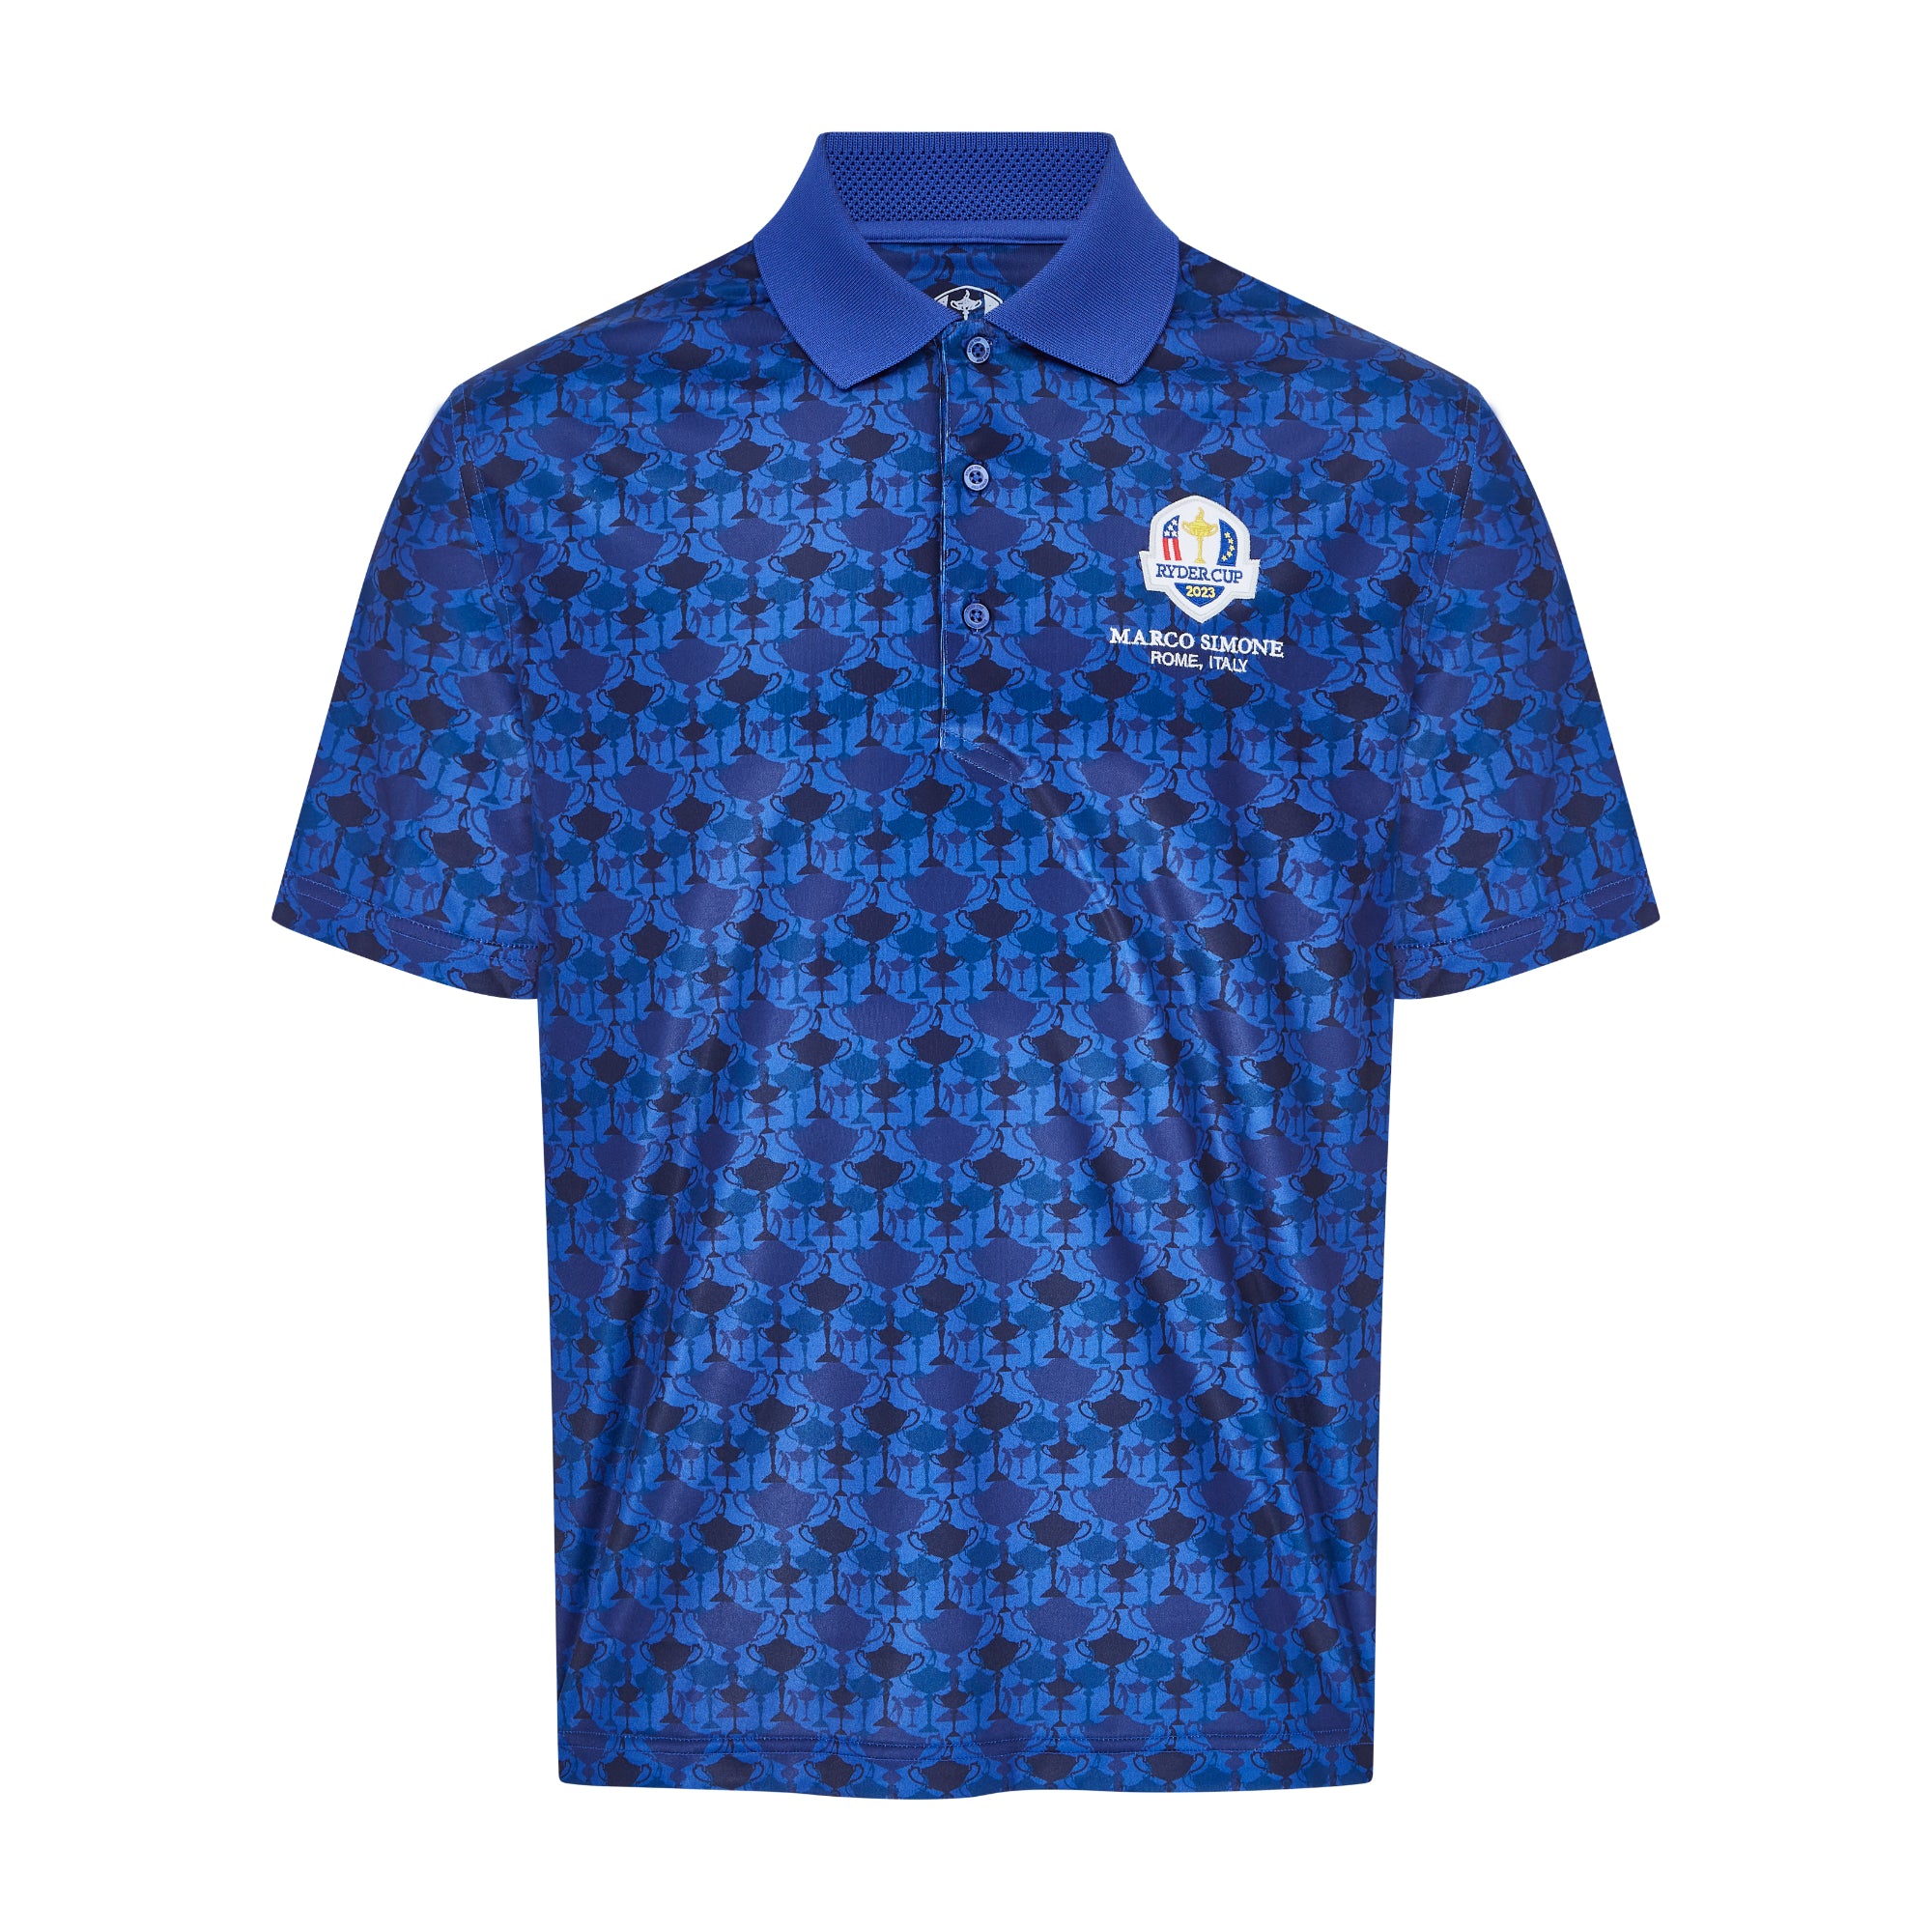 2023 Ryder Cup Rome Collection Men's Trophy Print Royal Blue Polo Shirt Front